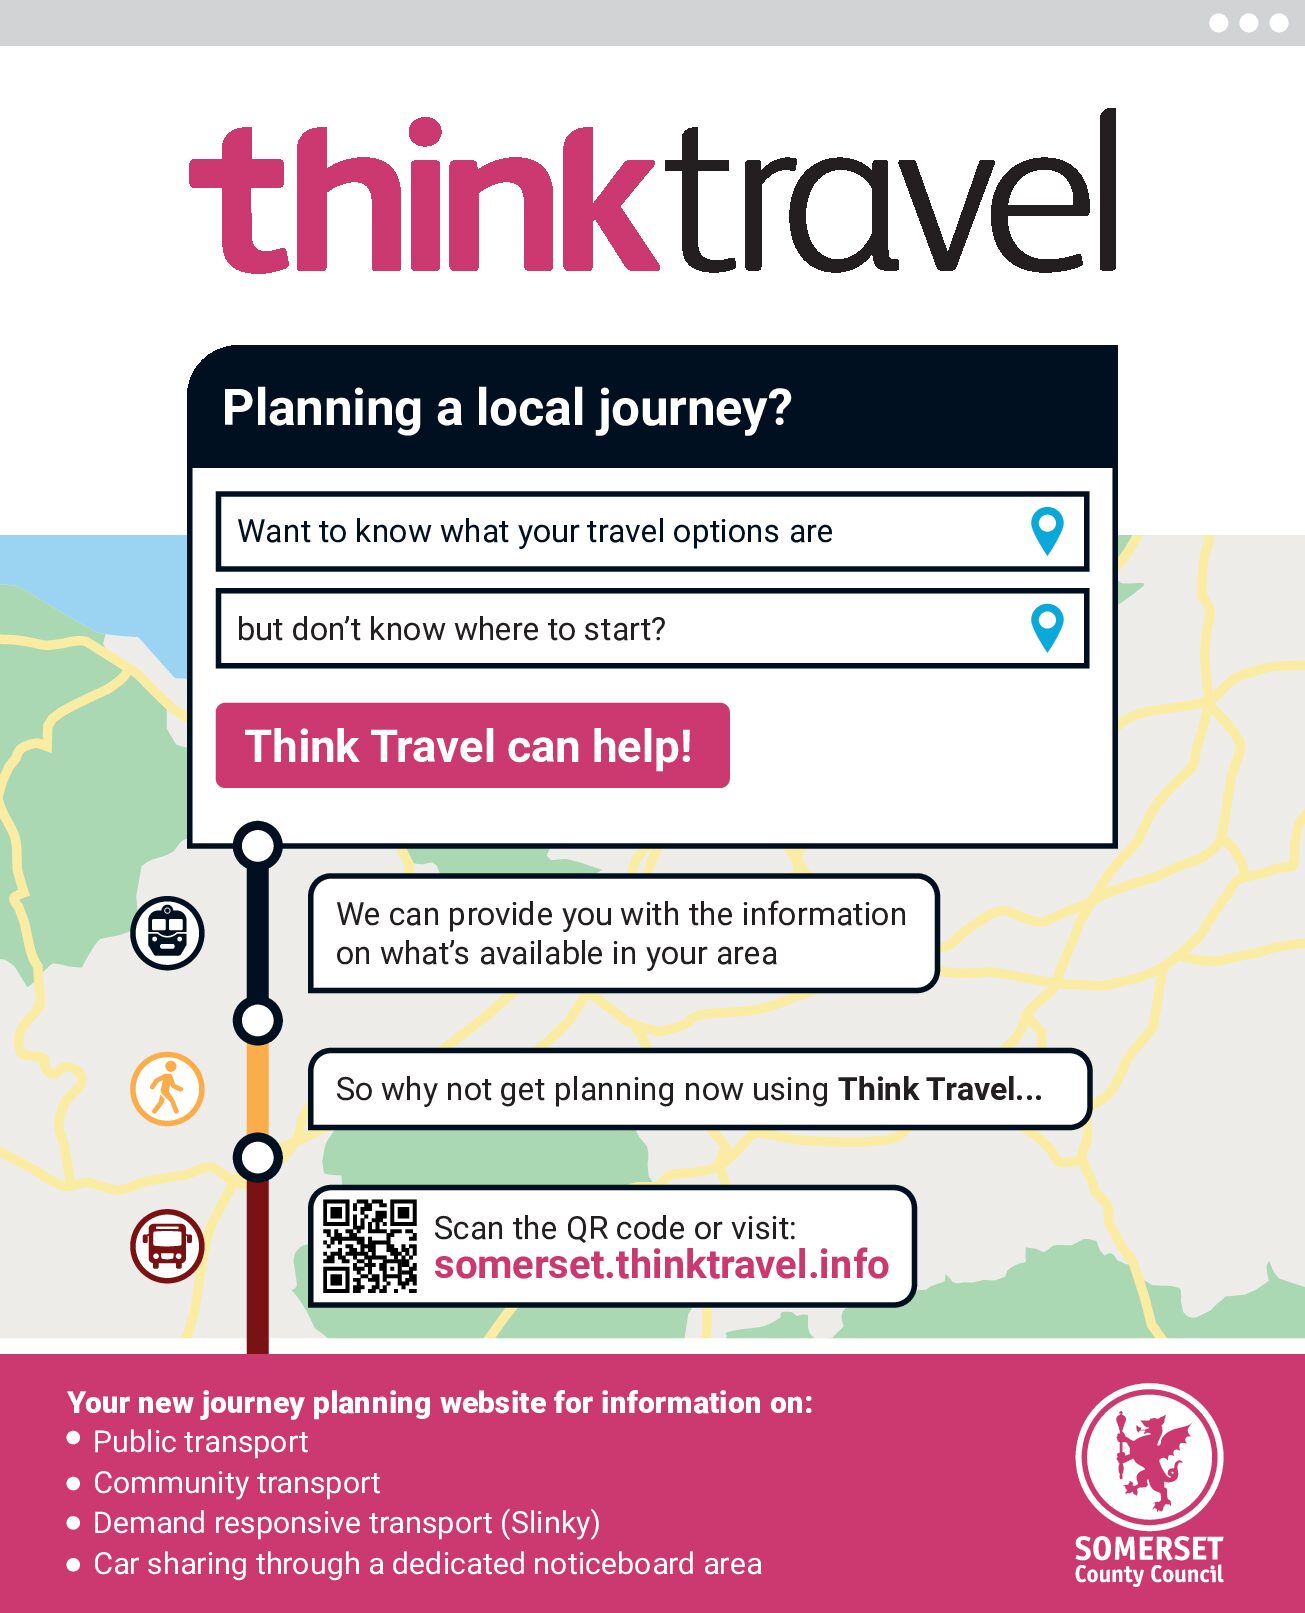 Somerset County Council have launched a new online travel planner